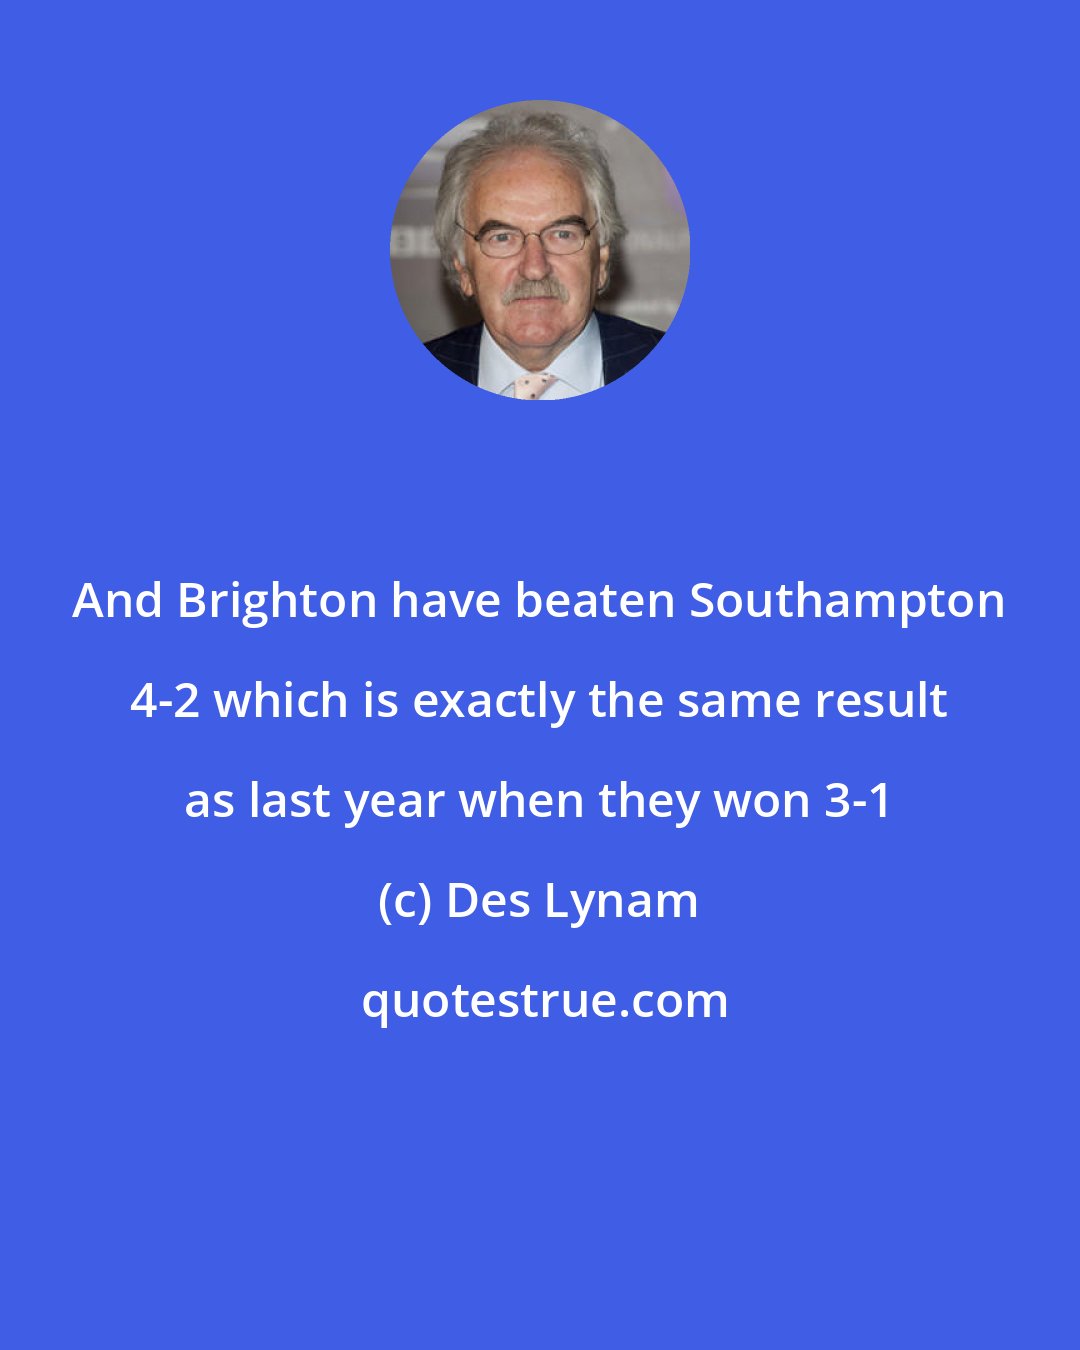 Des Lynam: And Brighton have beaten Southampton 4-2 which is exactly the same result as last year when they won 3-1